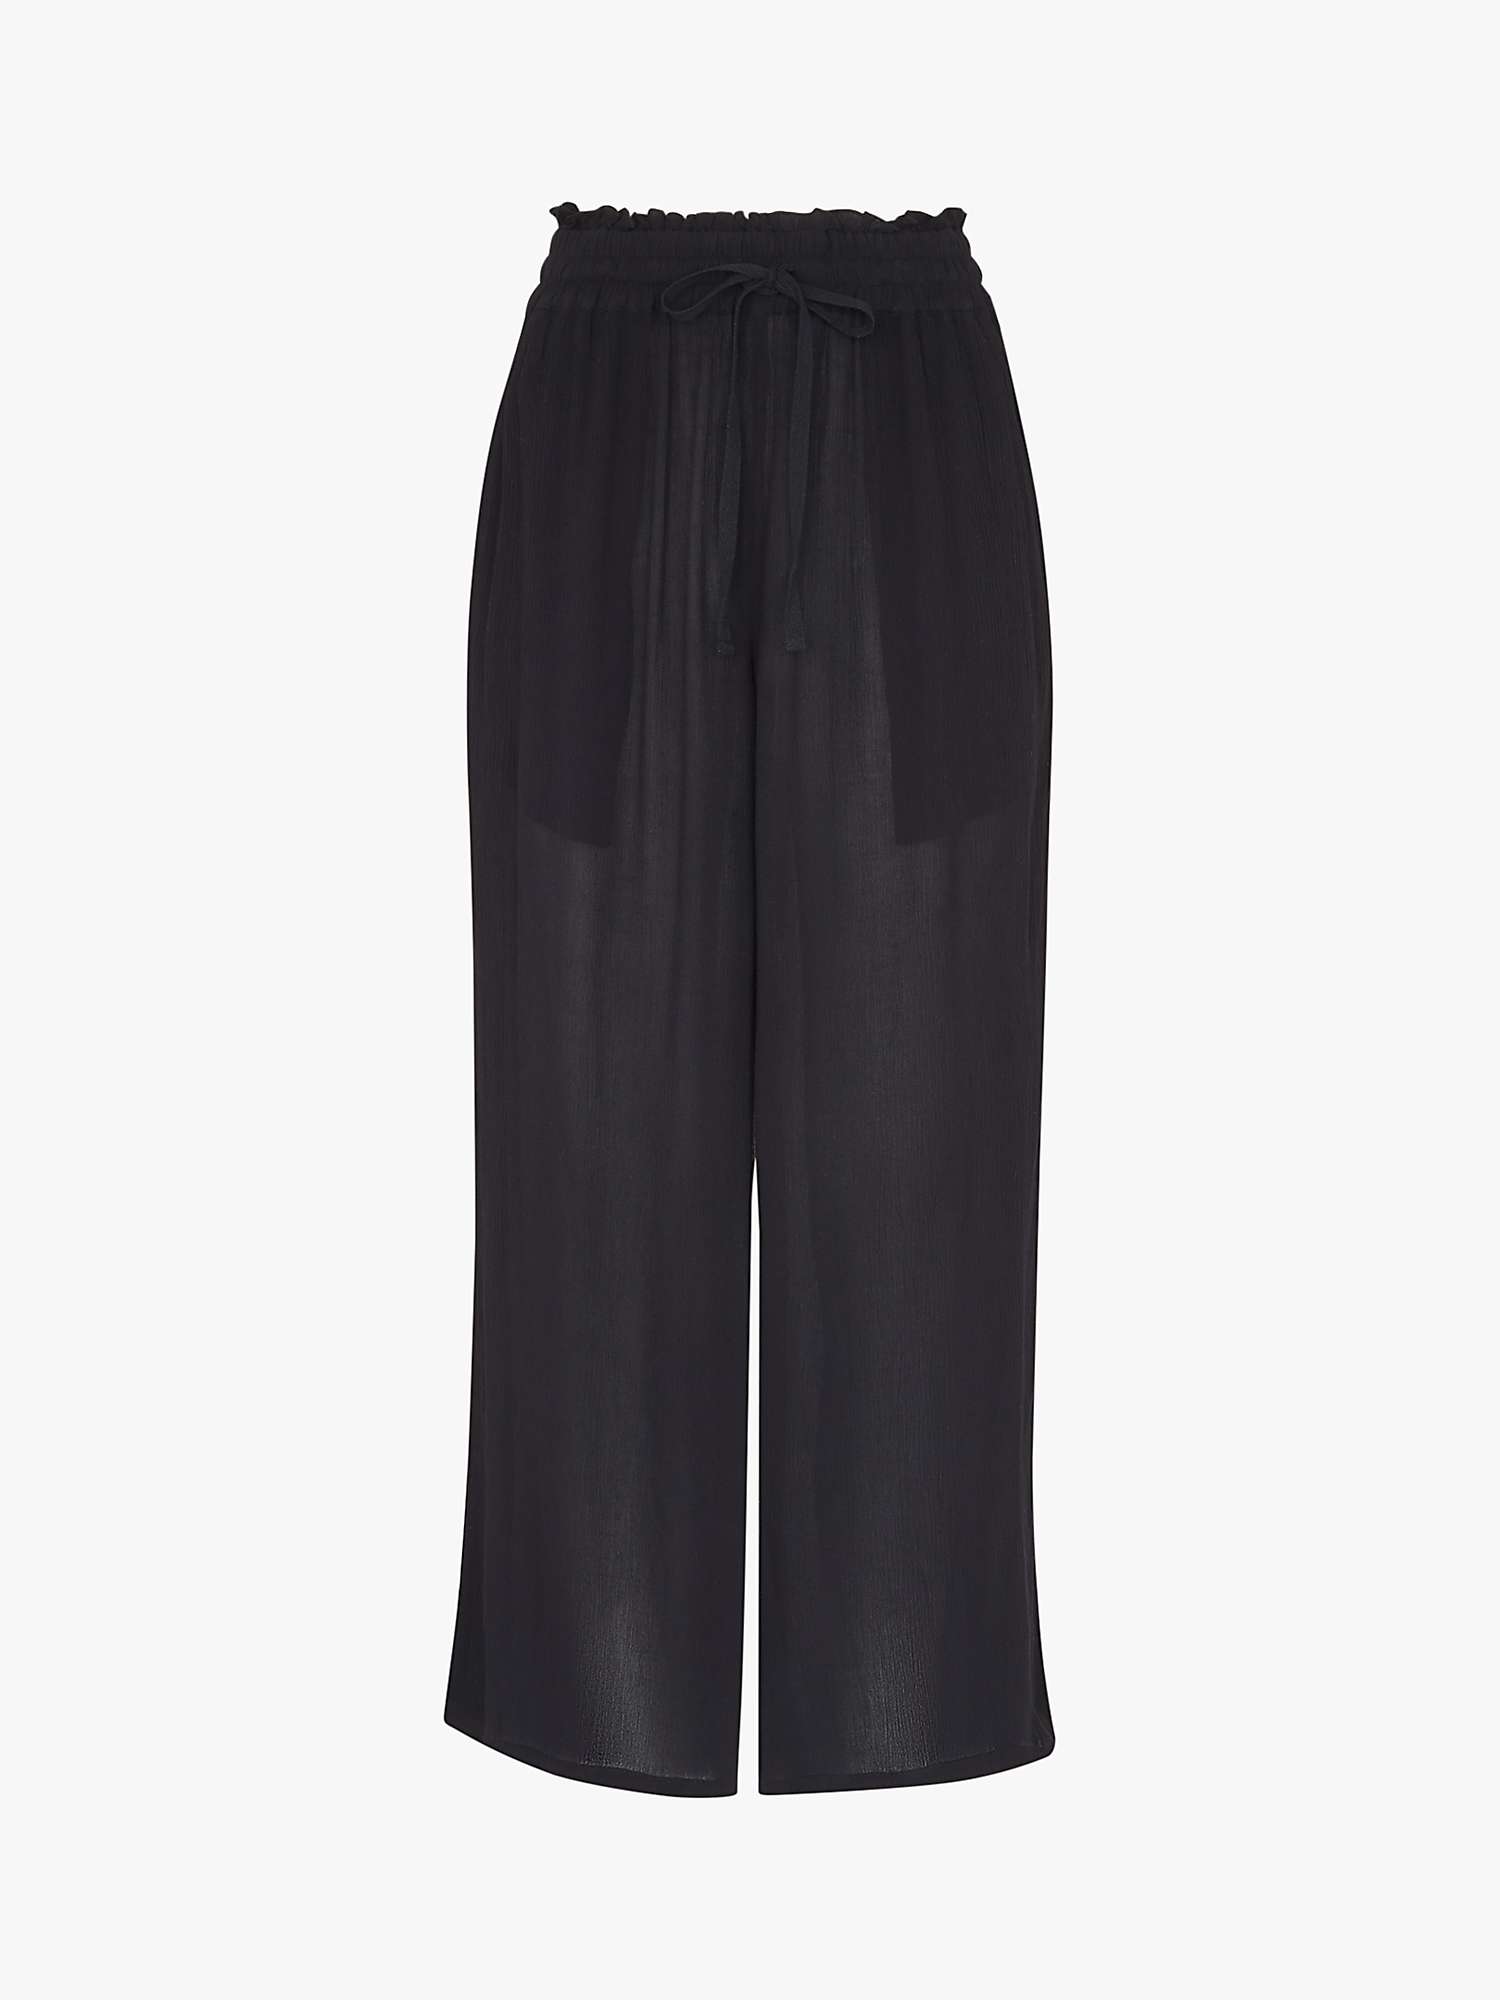 Whistles Imogen Fluid Cropped Trousers, Black at John Lewis & Partners